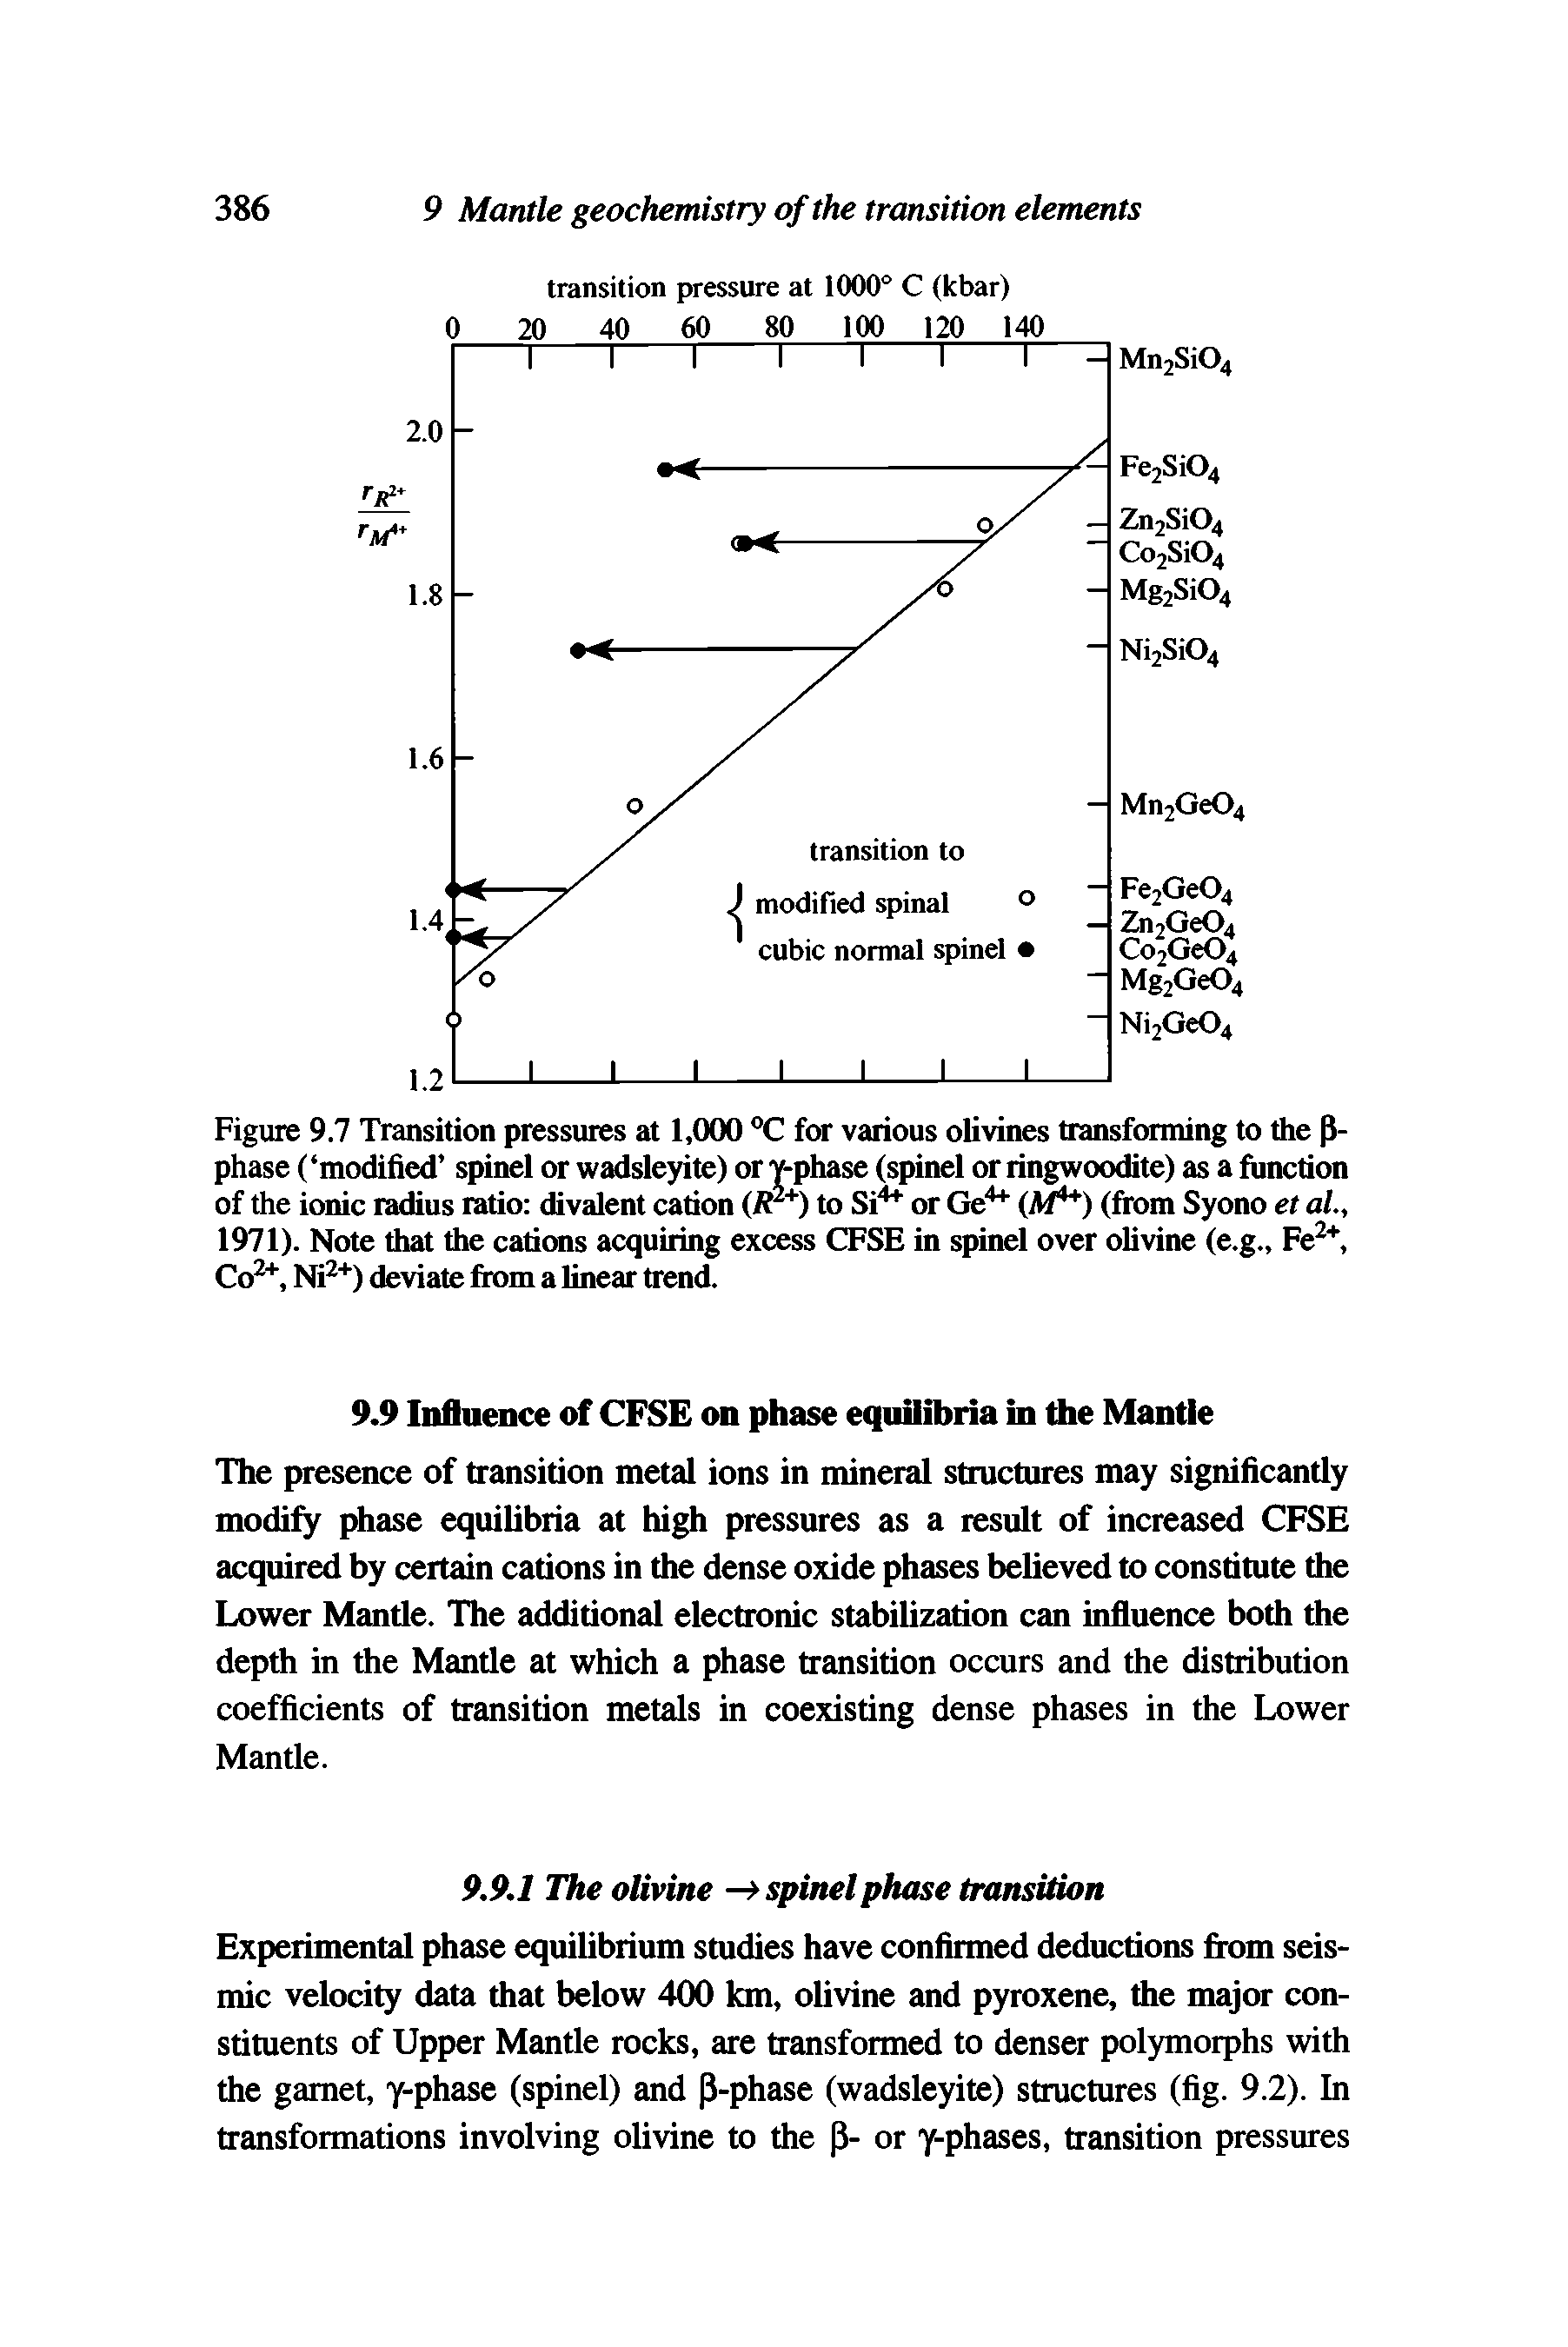 Figure 9.7 Transition pressures at 1,000 °C for various olivines transforming to the P-phase ( modified spinel or wadsleyite) or Y-phase (spinel or ringwoodite) as a function of the ionic radius ratio divalent cation (Fr+) to Si4 or Ge4 (M4 ) (from Syono et al., 1971). Note that the cations acquiring excess CFSE in spinel over olivine (e.g., Fe2+, Co2+, Ni2+) deviate from a linear trend.